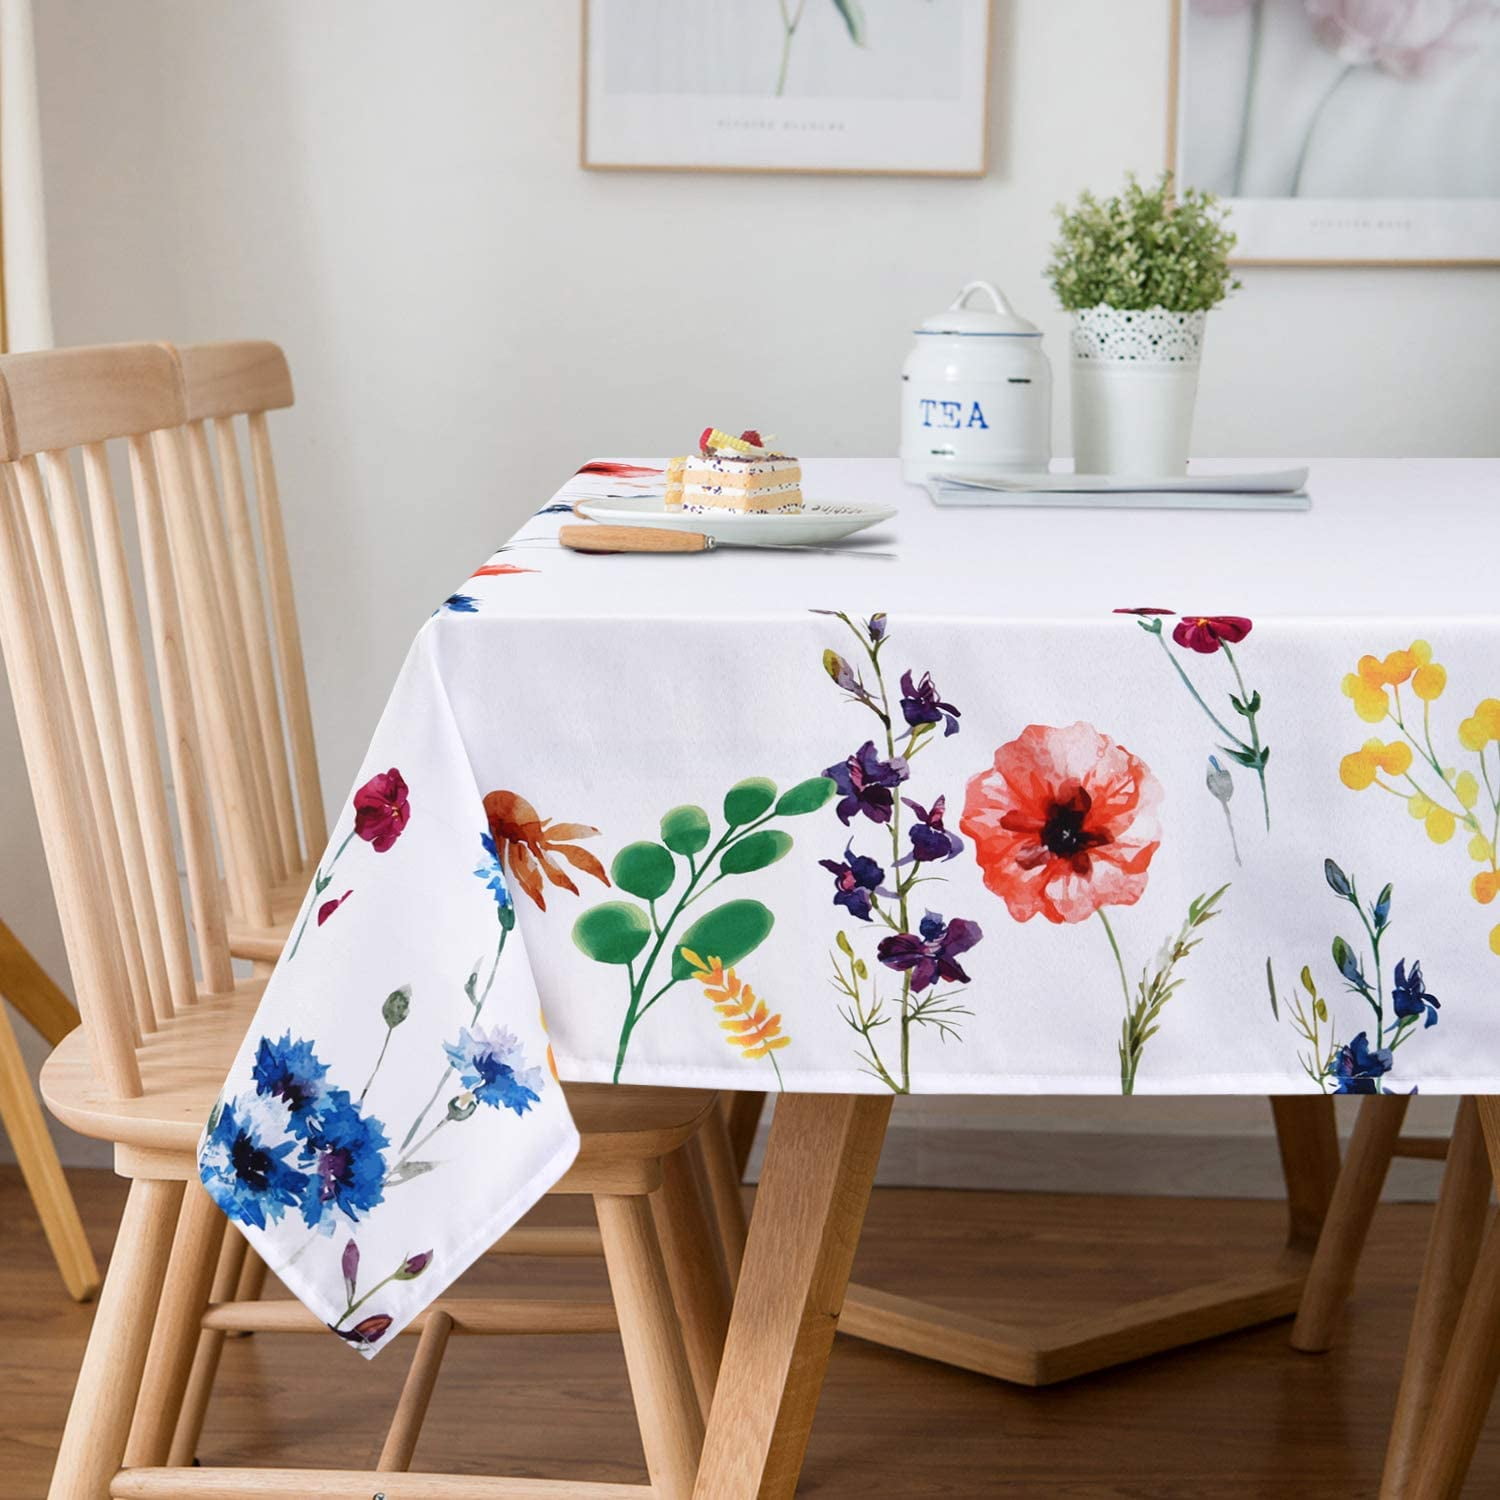 Qilmy Watercolor Blue Flower Square Tablecloth Dust Proof Cover Table Cloth Cover Mat Washable Polyester Decorative for Kitchen Dinning Holiday Party Wedding Picnic 60 x 60 Inch